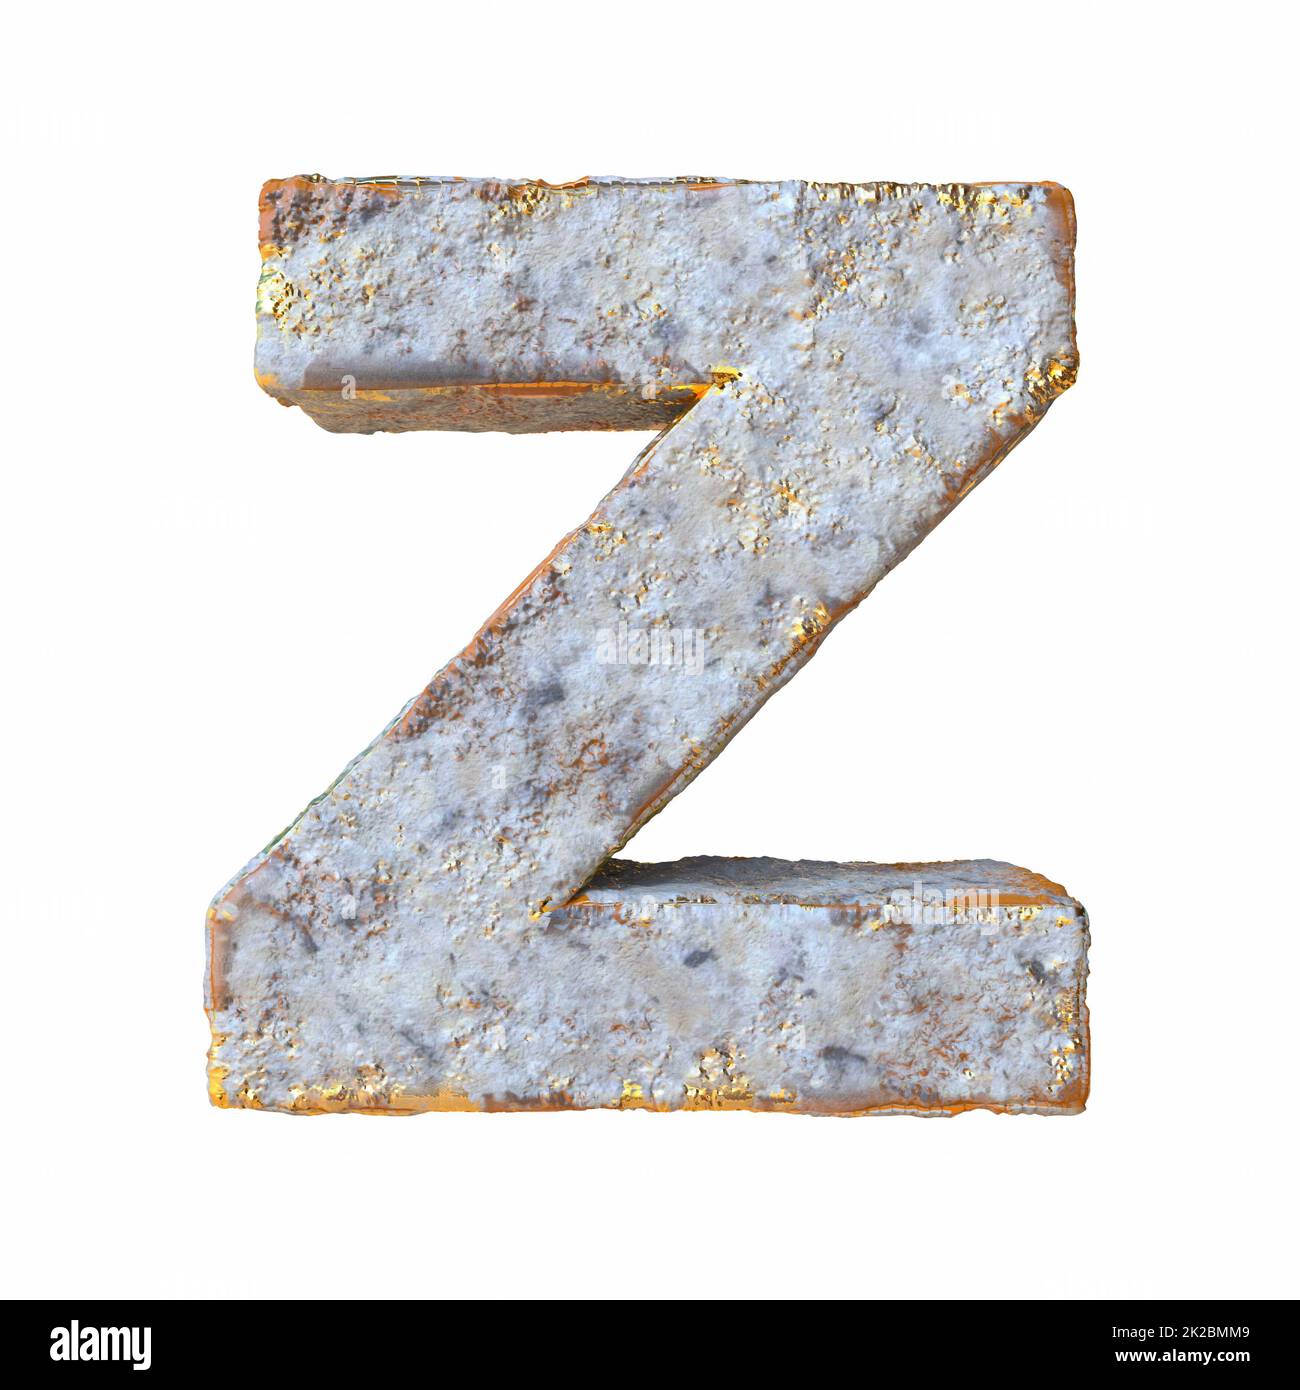 Stone with golden metal particles Letter Z 3D Stock Photo